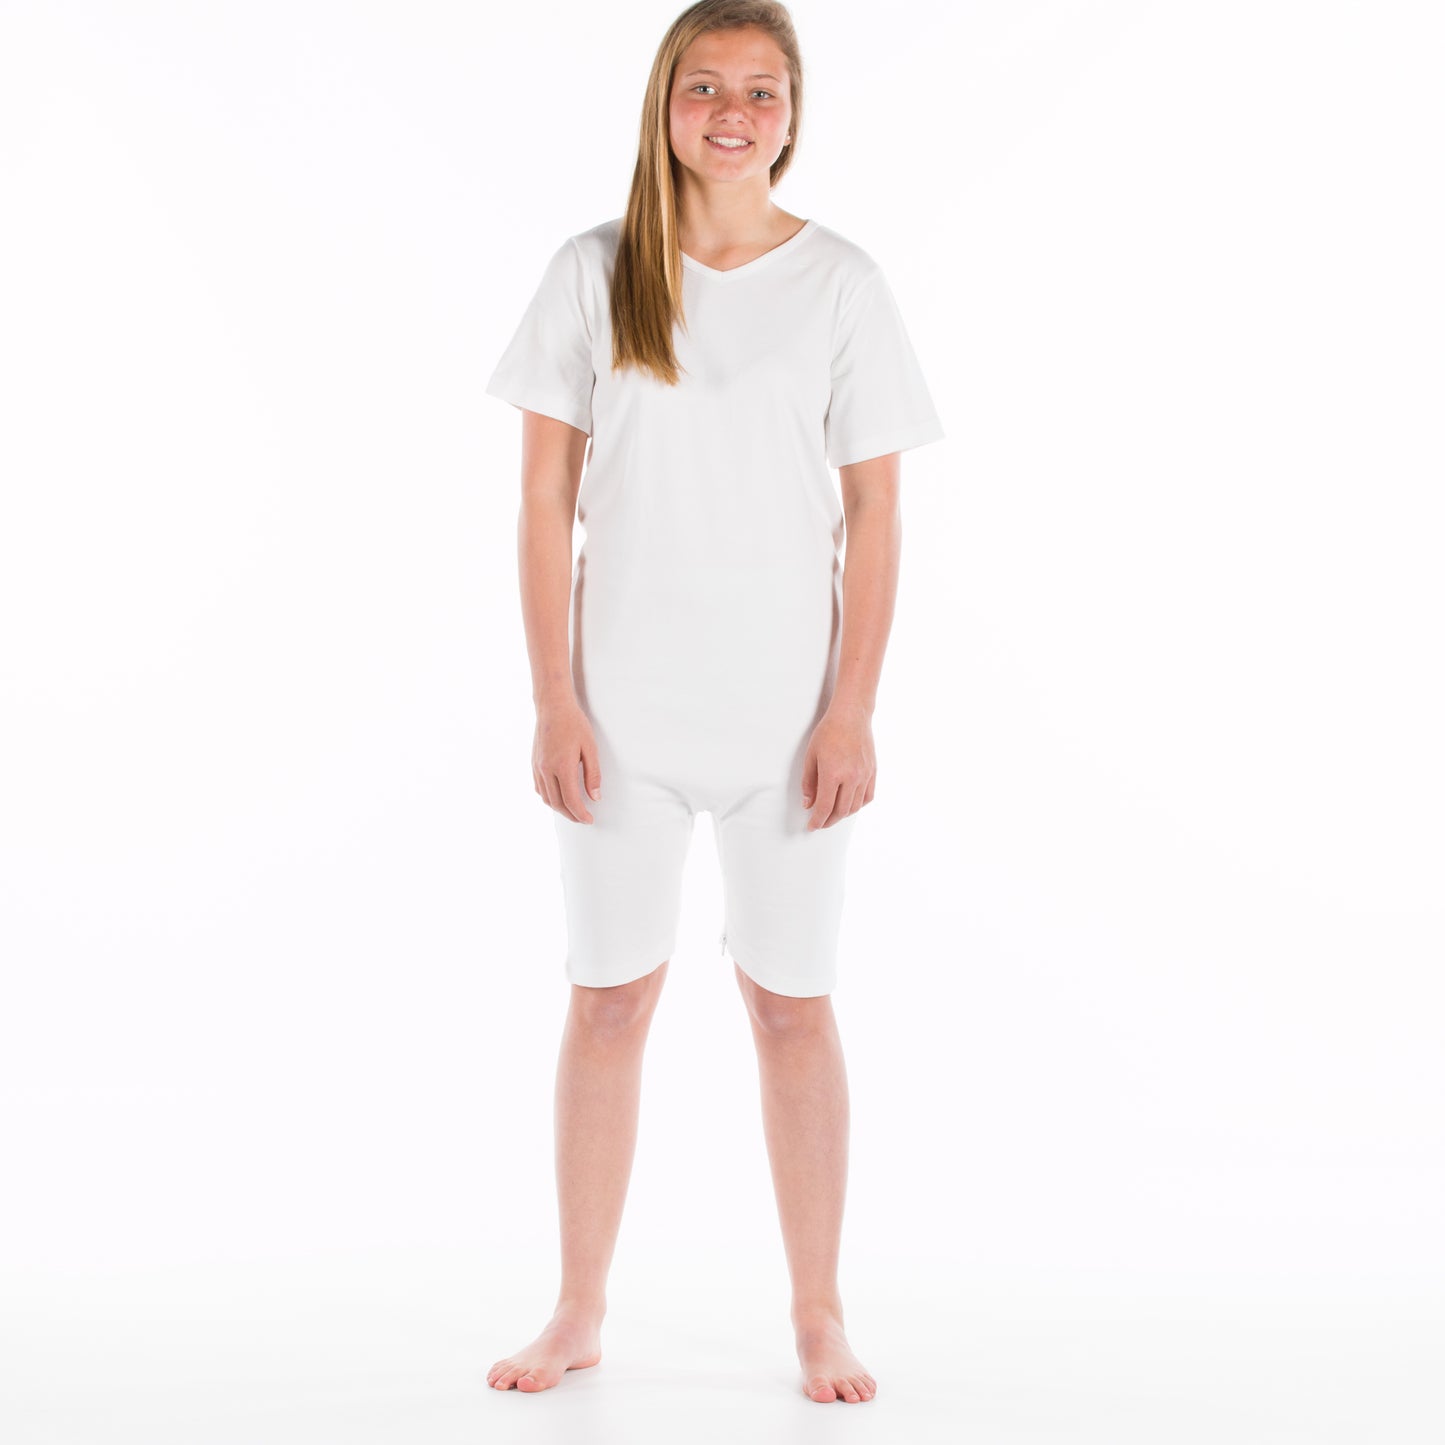 Children's Bodysuit - Short Sleeves and Legs/Back and Crotch Zip  (4020)